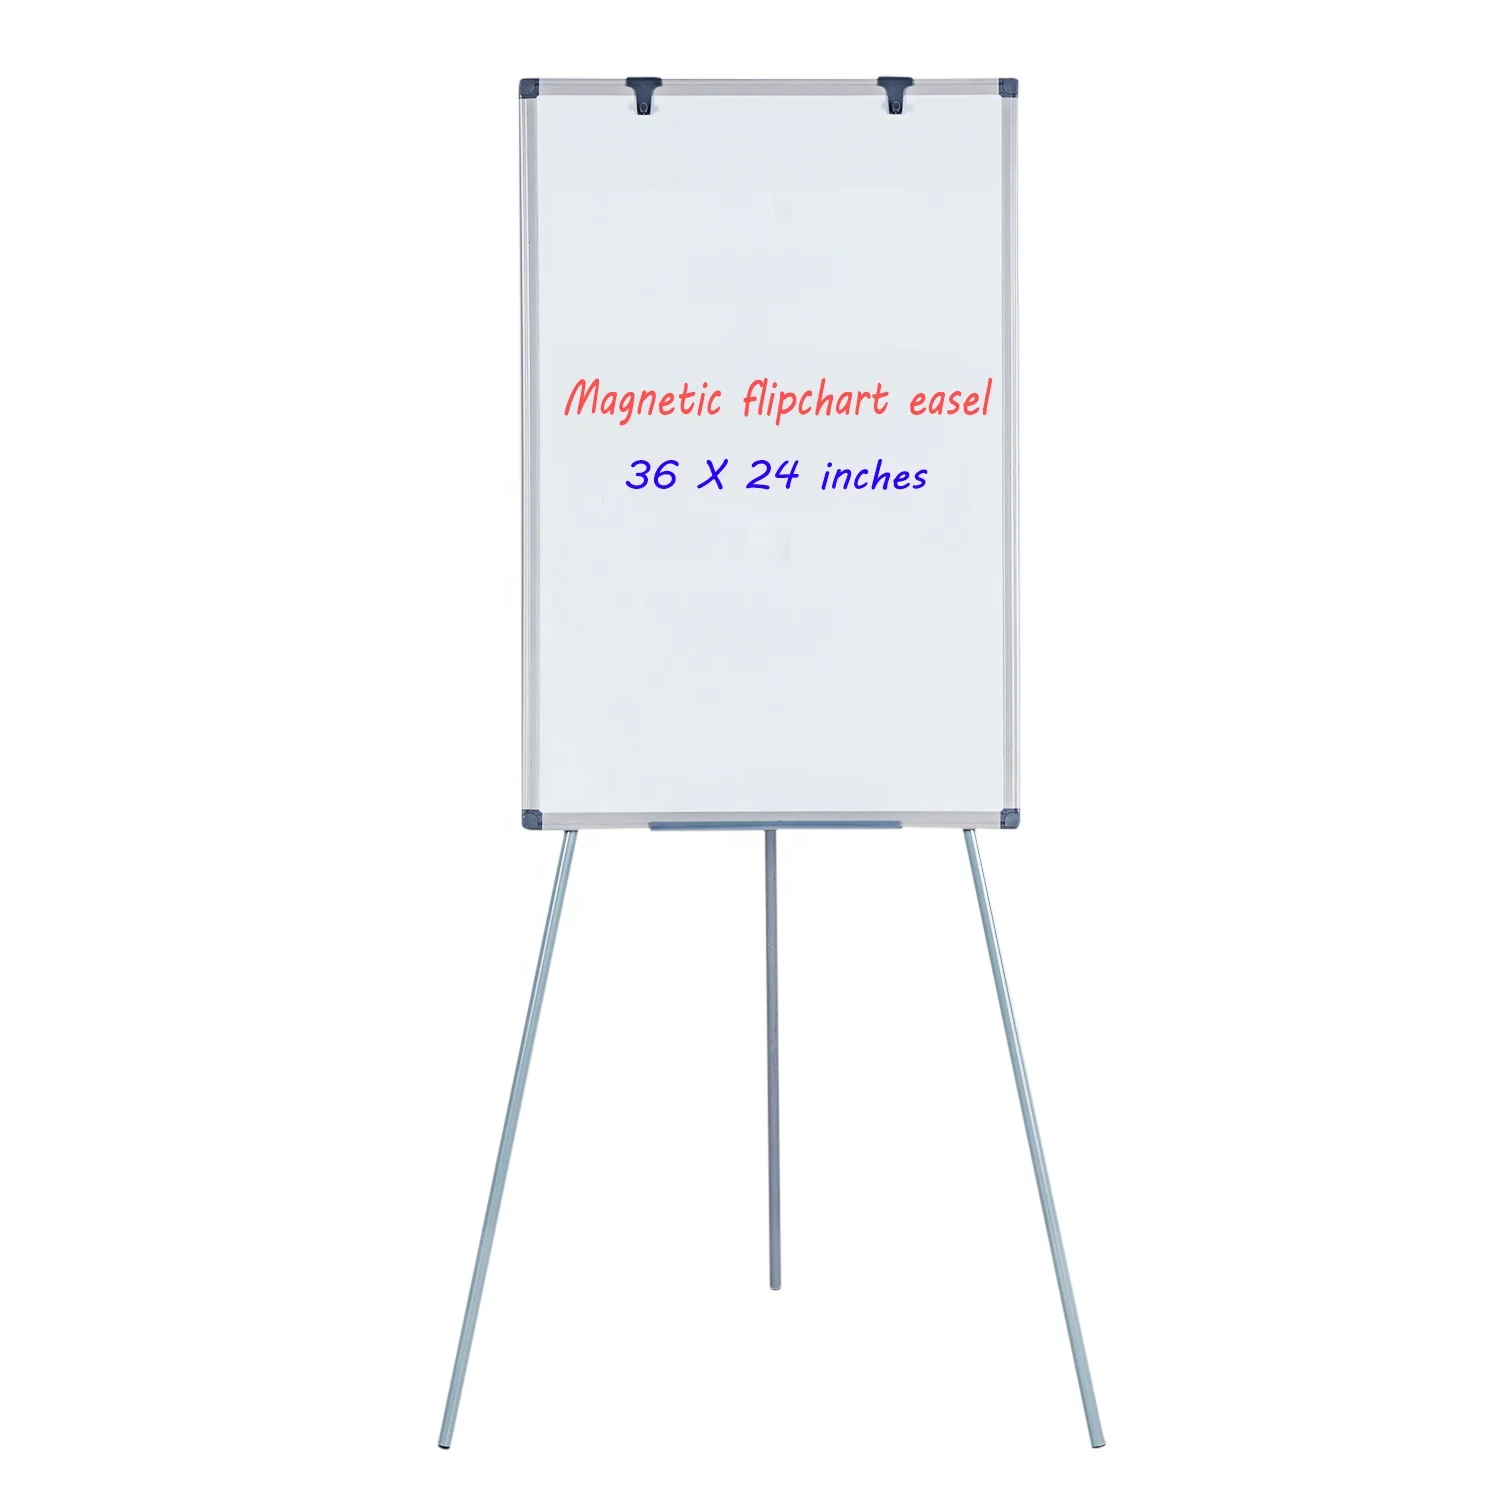 100X70 Cm Flip Chart Stand Whiteboard with Tripod Easel for School Supply -  China Magnetic Flipchart, White Board Flipchart Easel